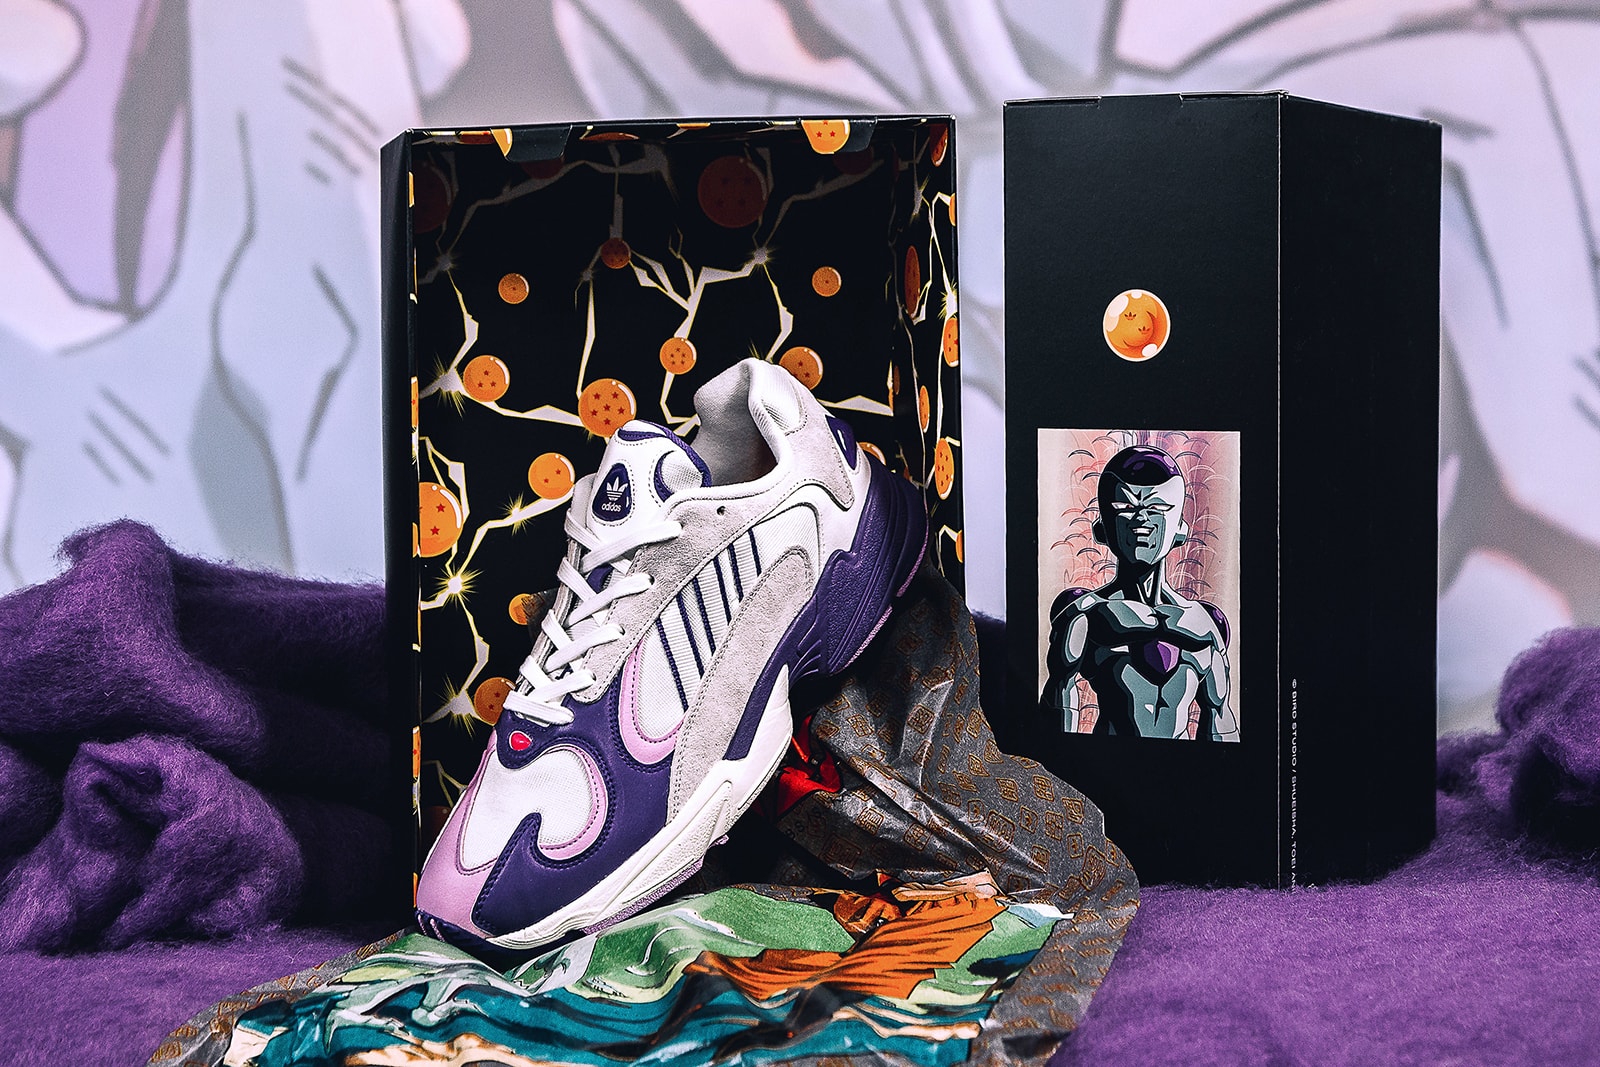 Dragon Ball Z x Adidas Sneakers for Majin Buu and Cell Coming